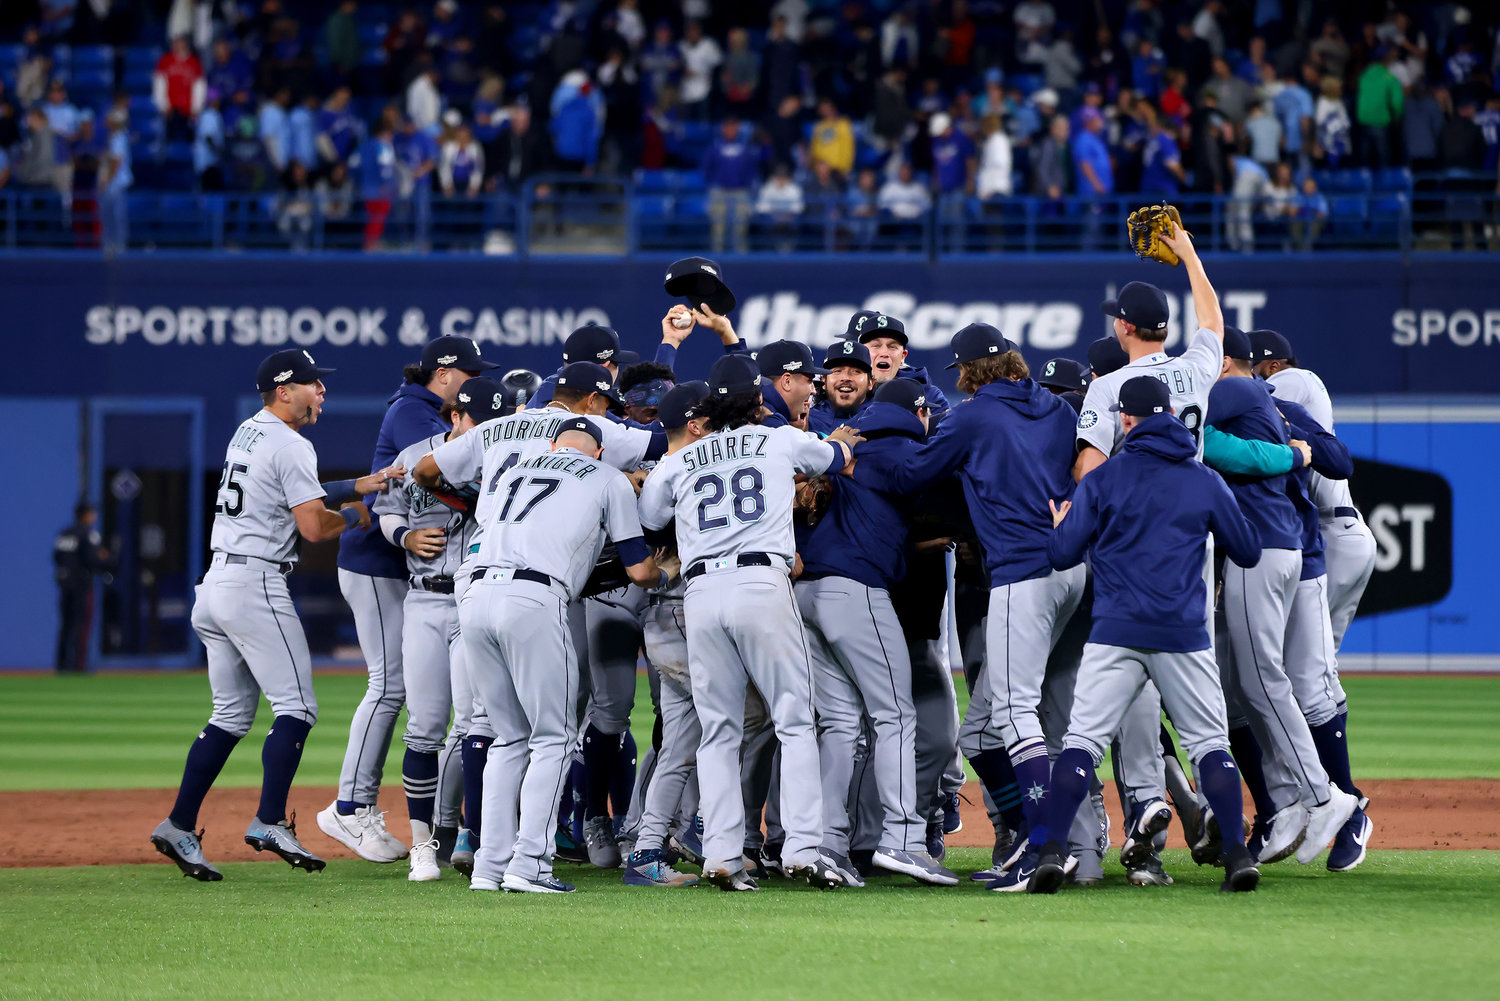 The Seattle Mariners celebrate after defeating the Toronto Blue Jays, 10-9, in Game 2 to win the American League Wild Card Series at Rogers Centre on Oct. 8, 2022, in Toronto. (Vaughn Ridley/Getty Images/TNS)